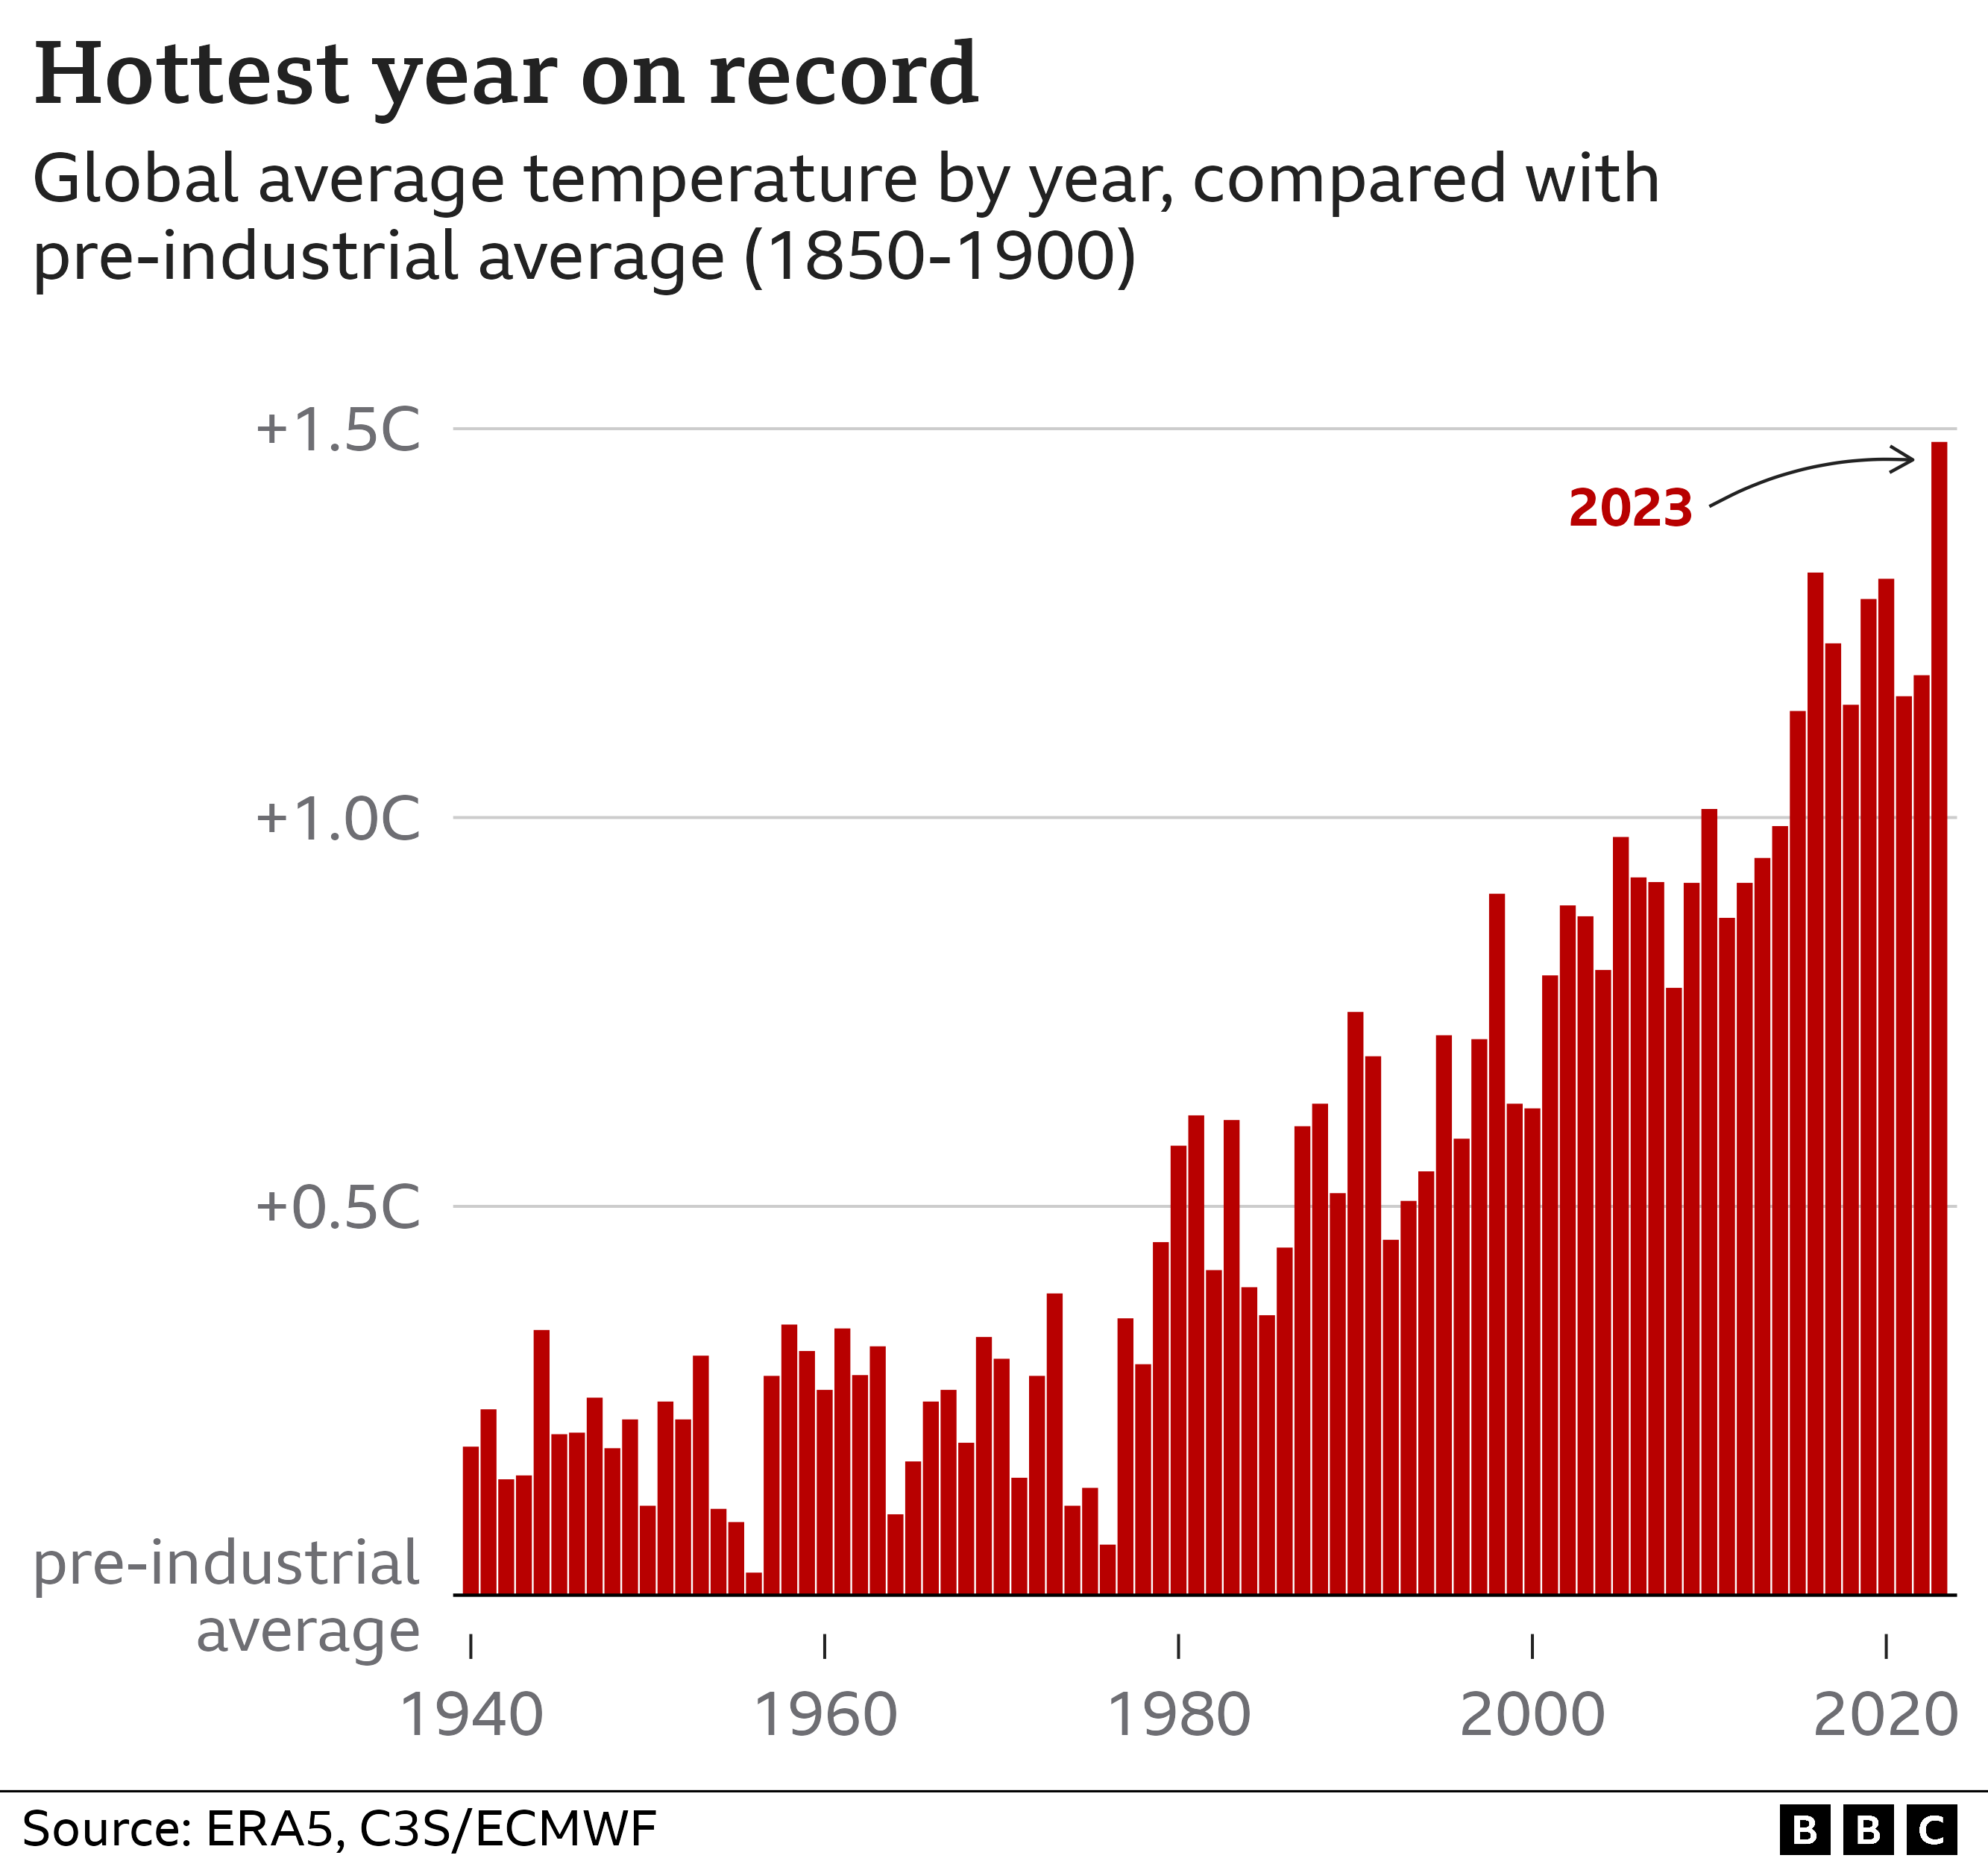 Graph showing 2023 as hottest year on record